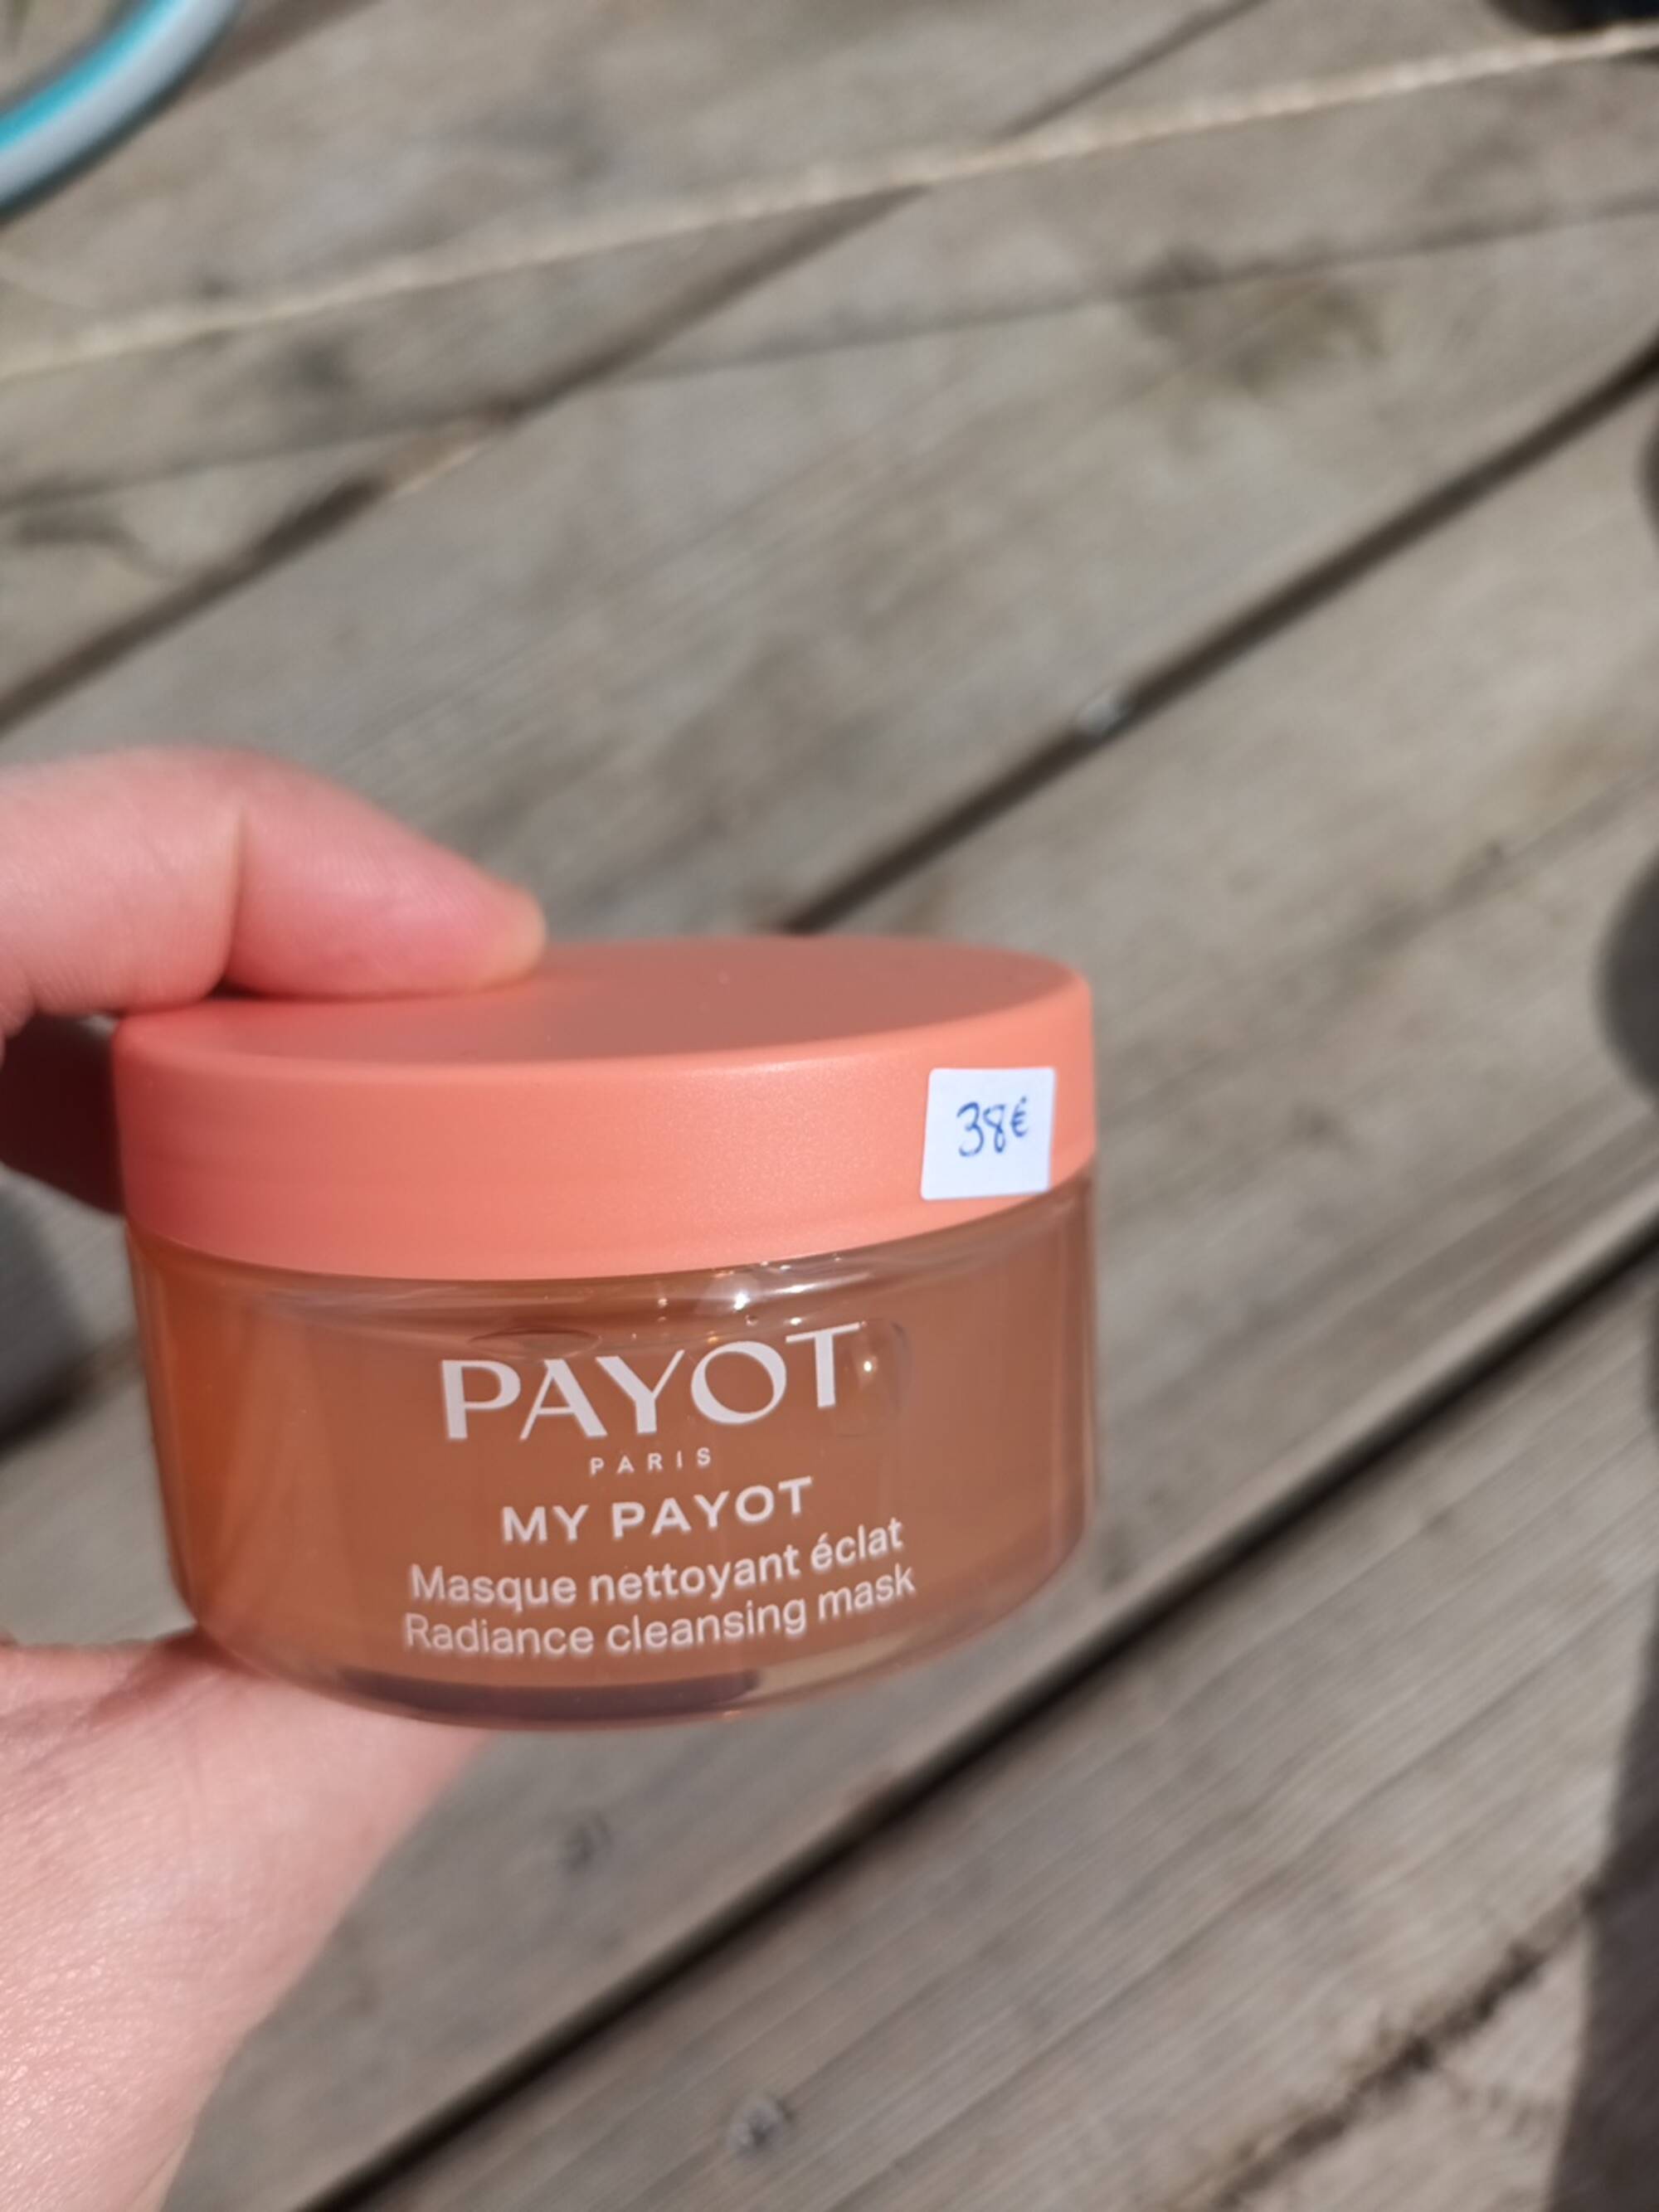 PAYOT - My payot - Masque nettoyant éclat